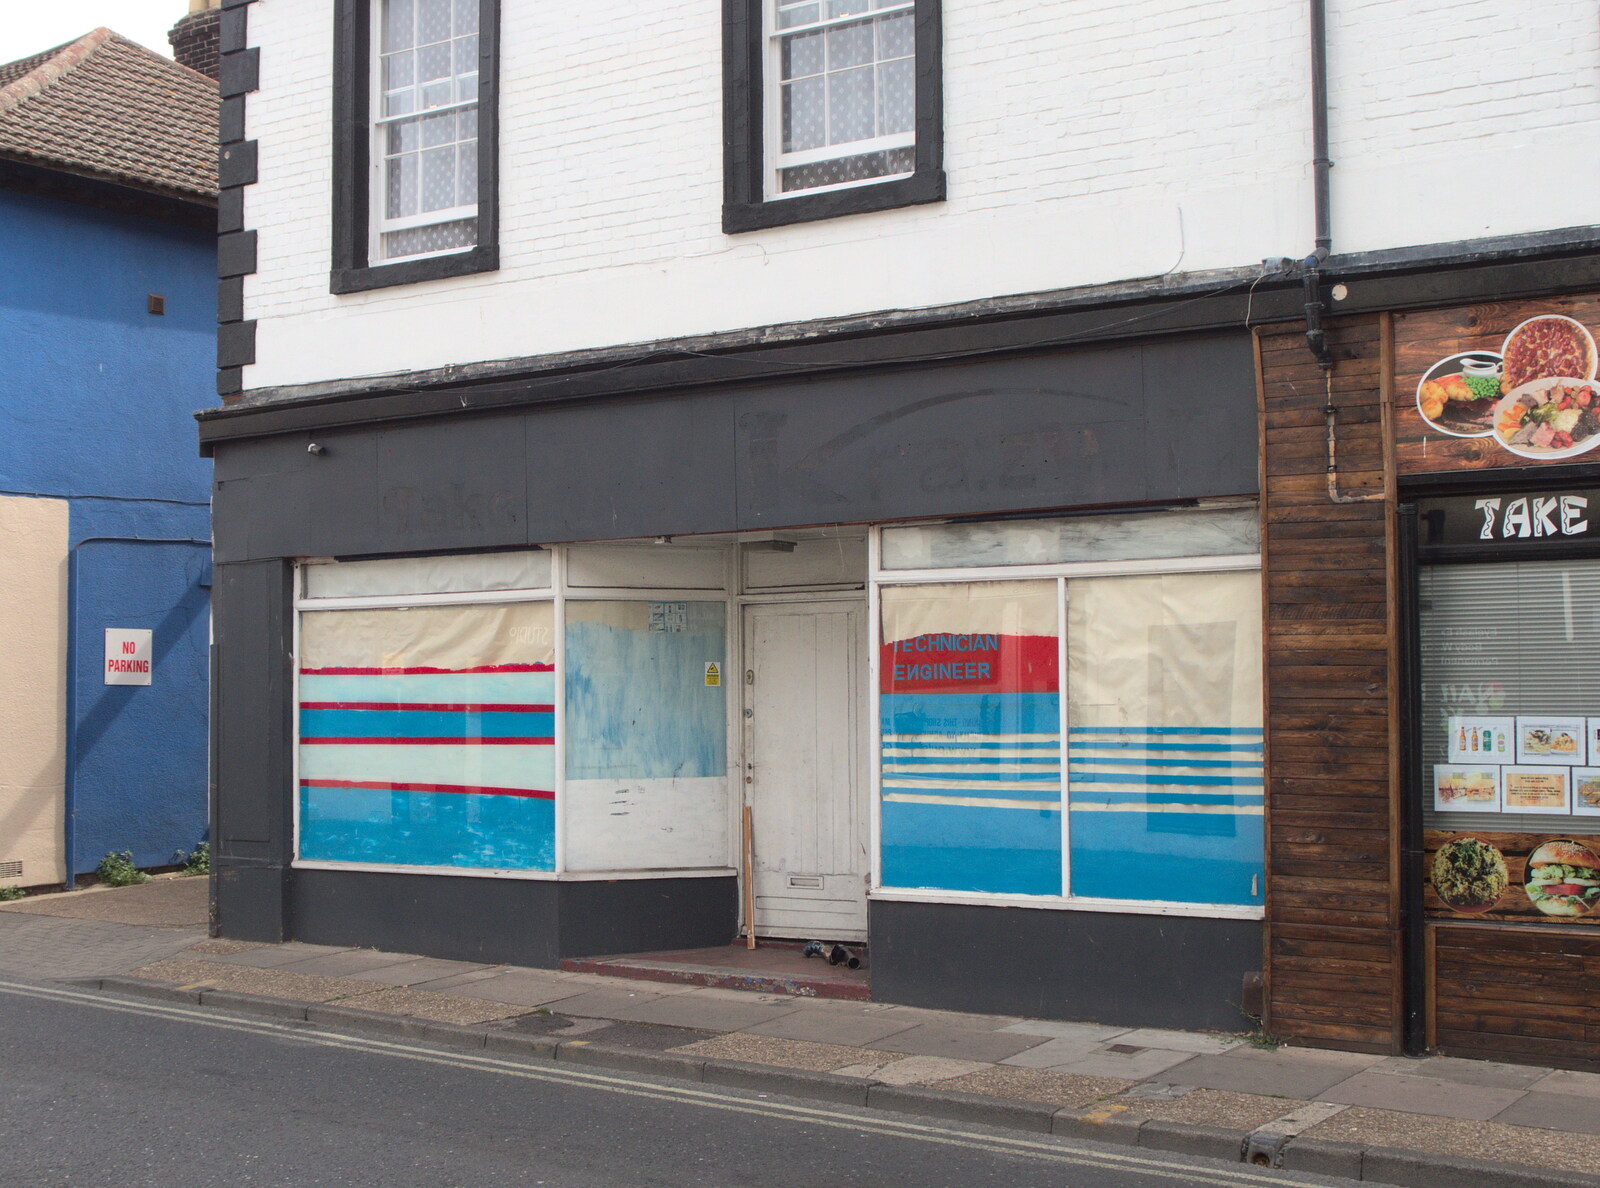 The Eye Piggy Tail Trail and Ipswich Dereliction, Suffolk - 29th July 2022: An empty shop on Upper Orwell Street